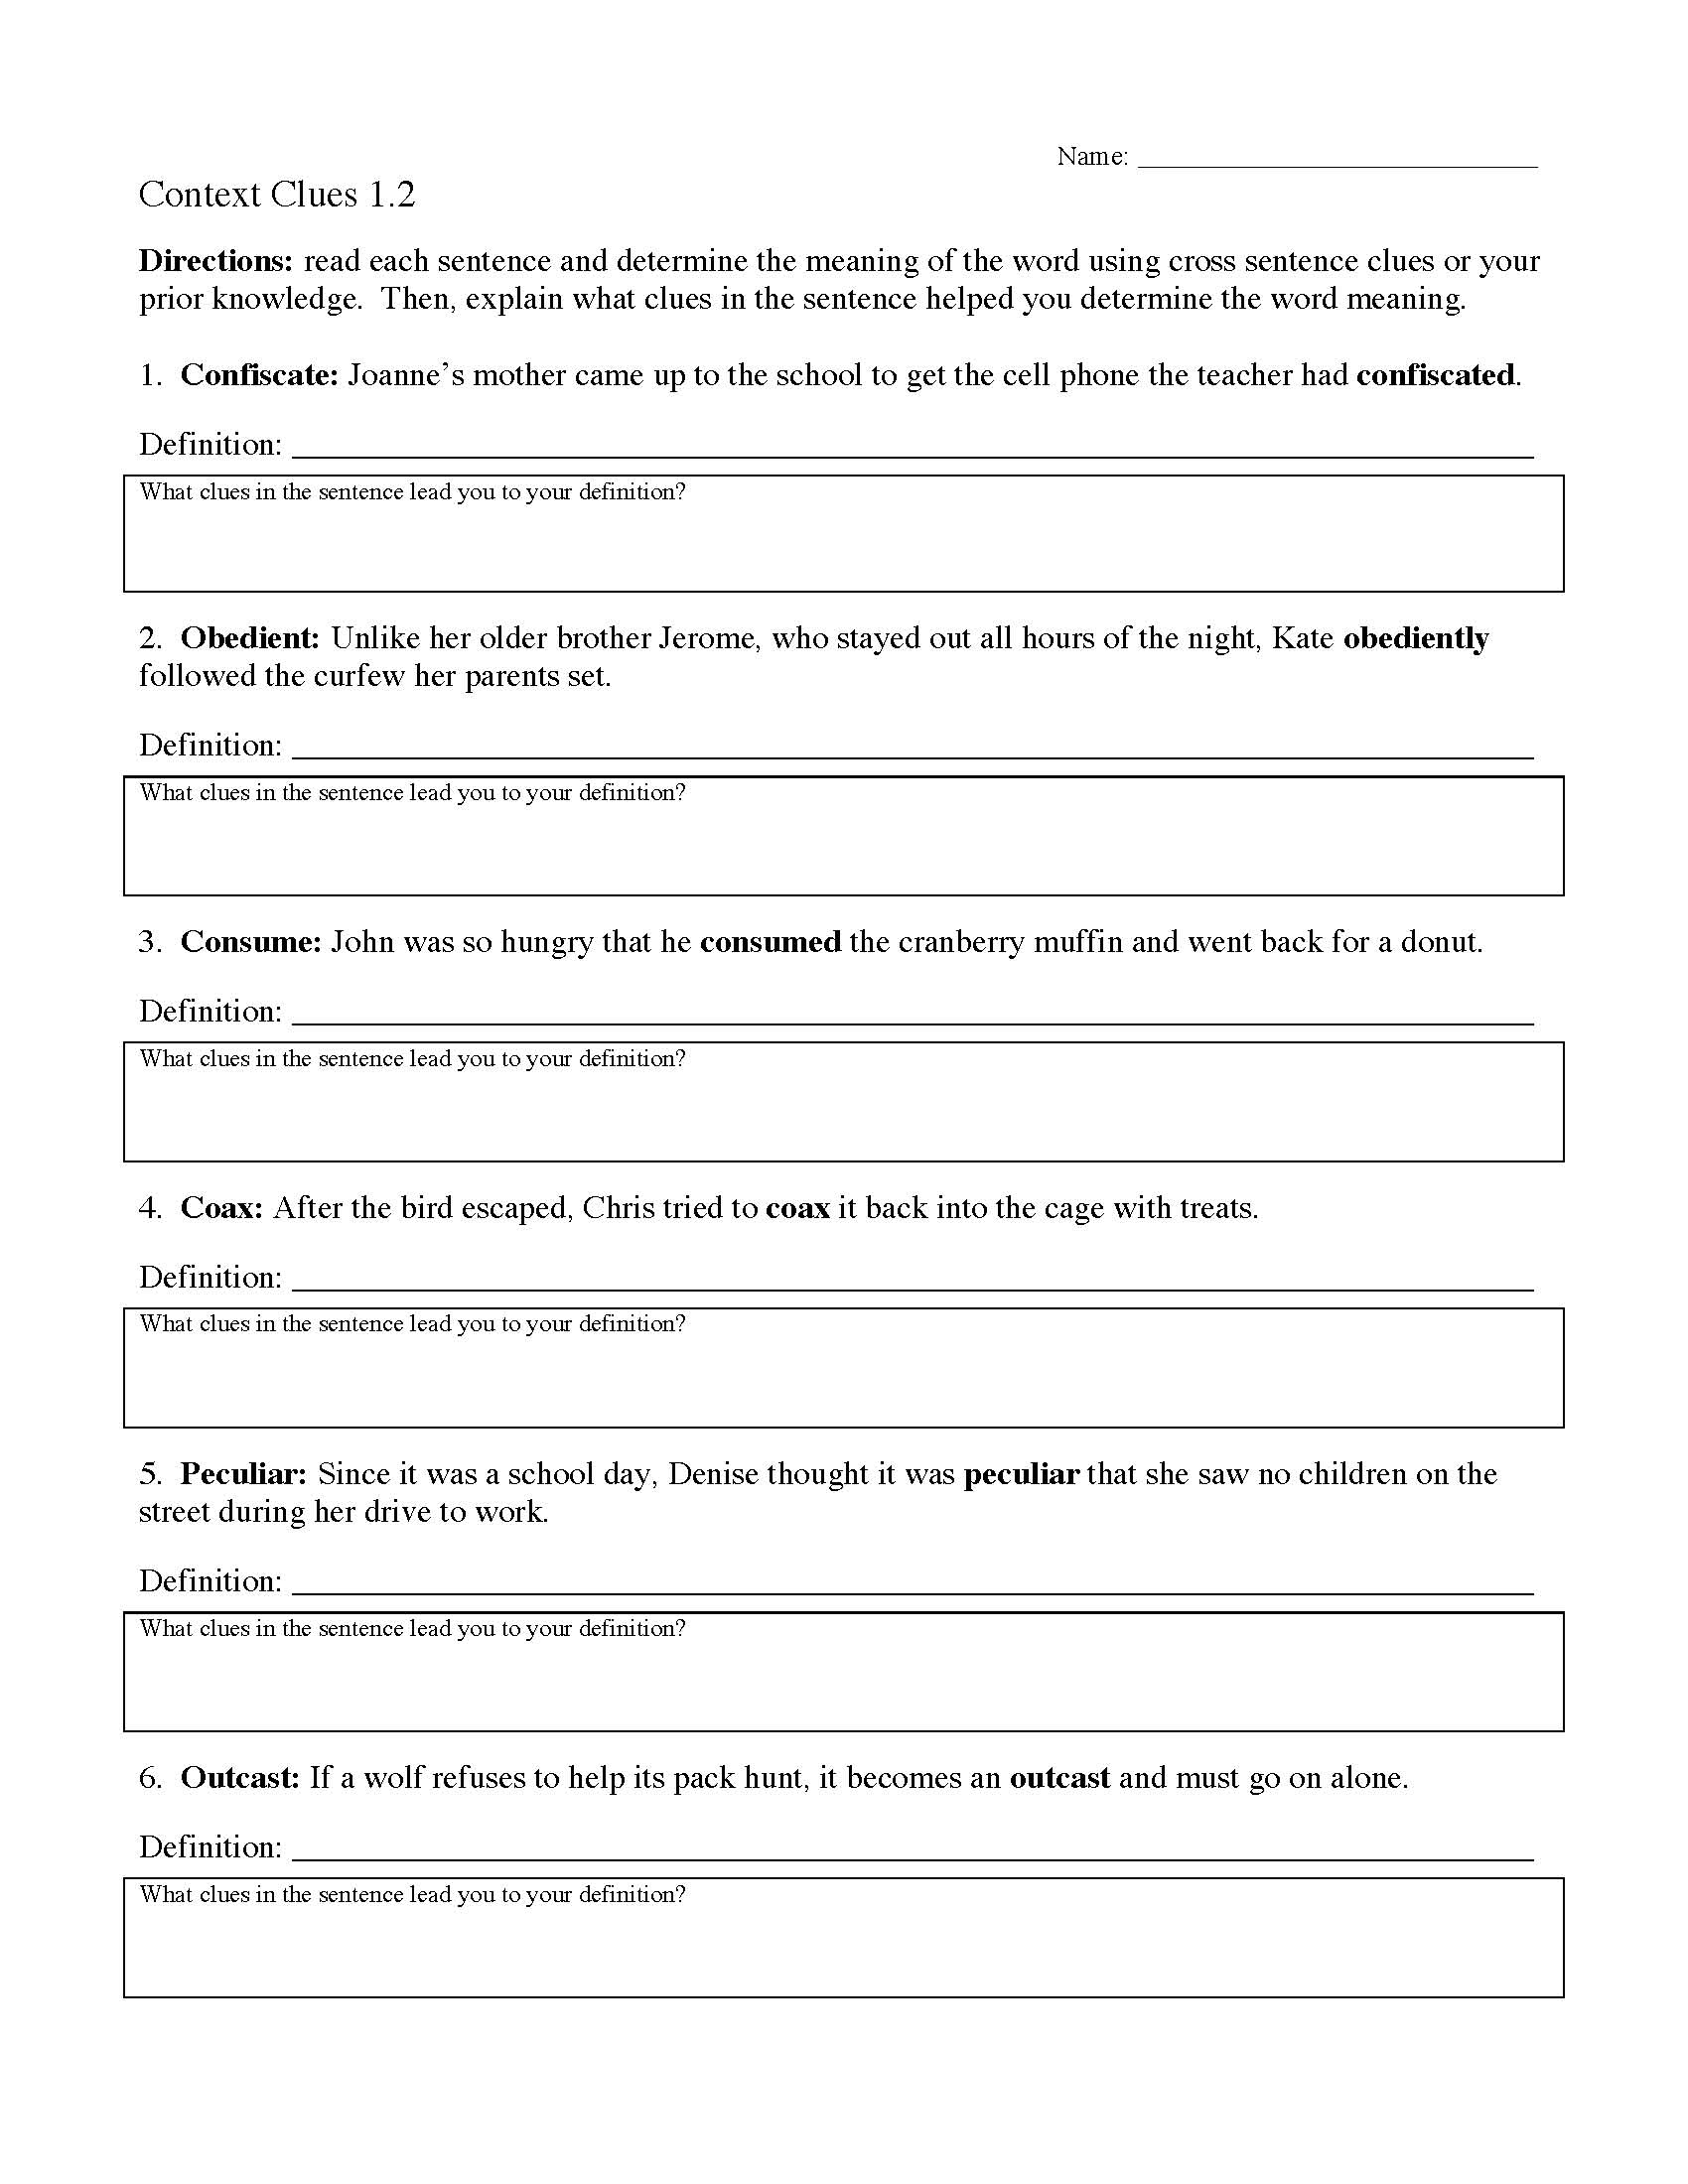 context clues worksheets ereading worksheets